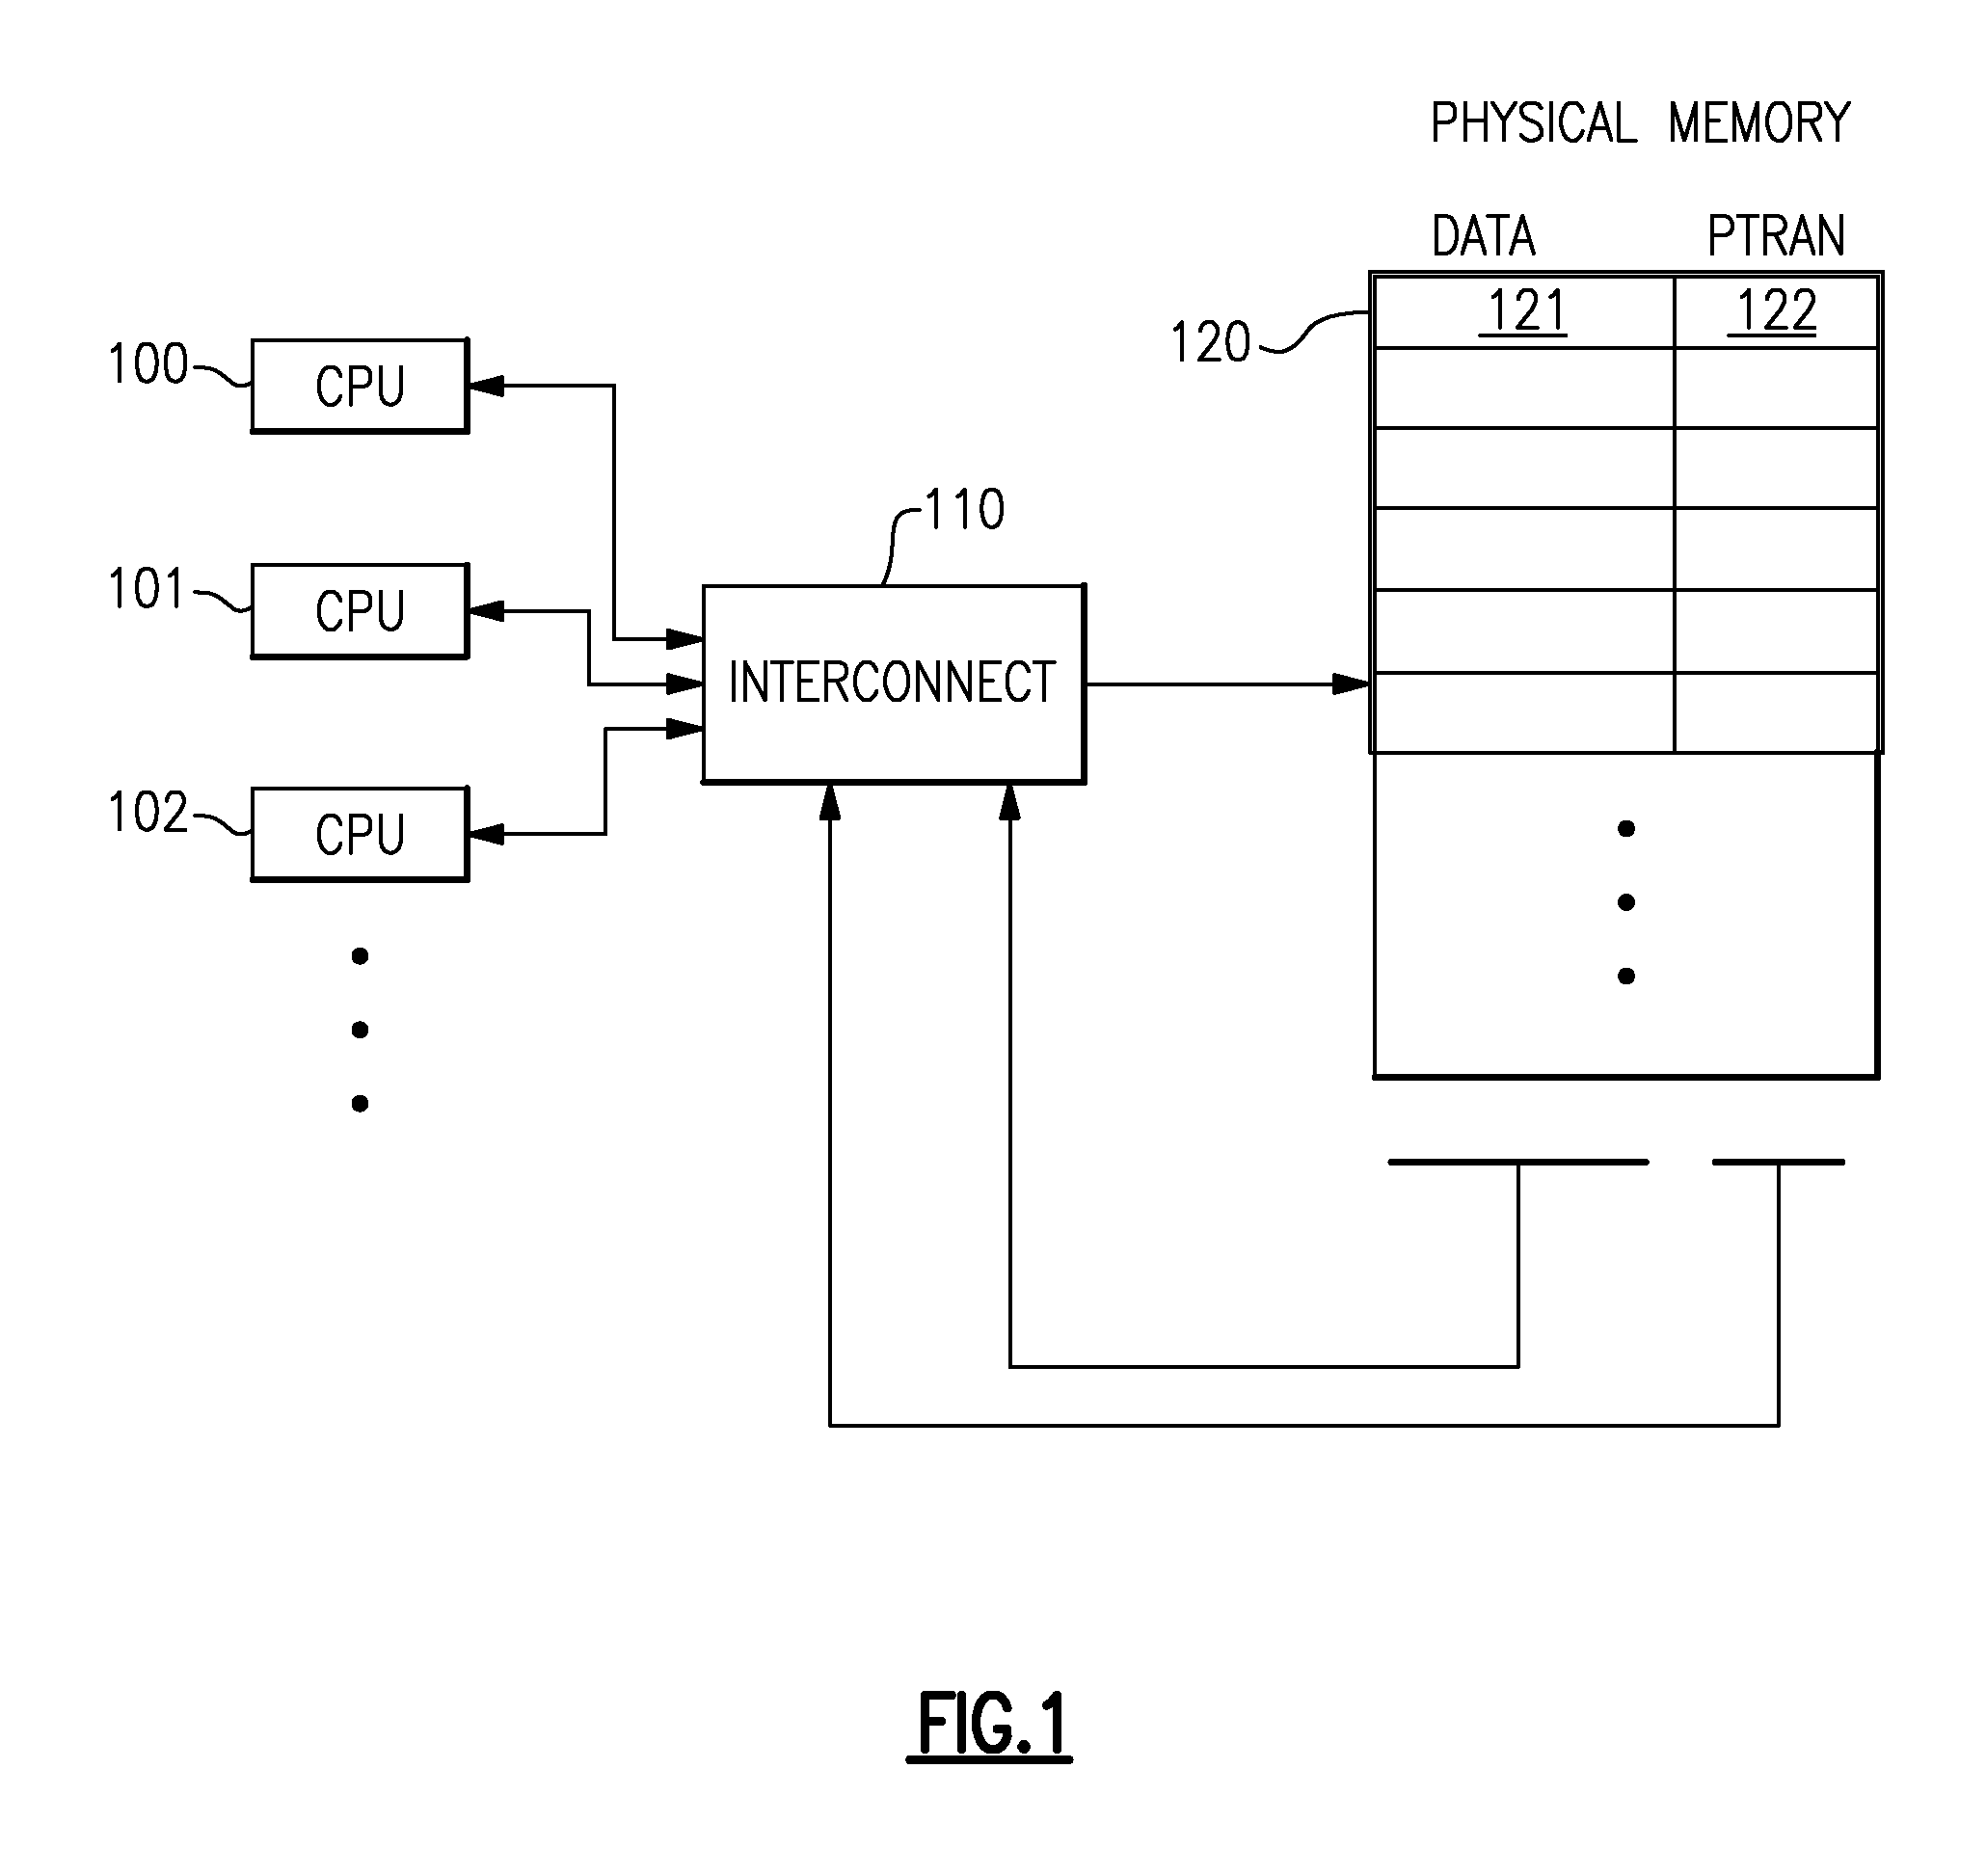 Transactional memory system which employs thread assists using address history tables